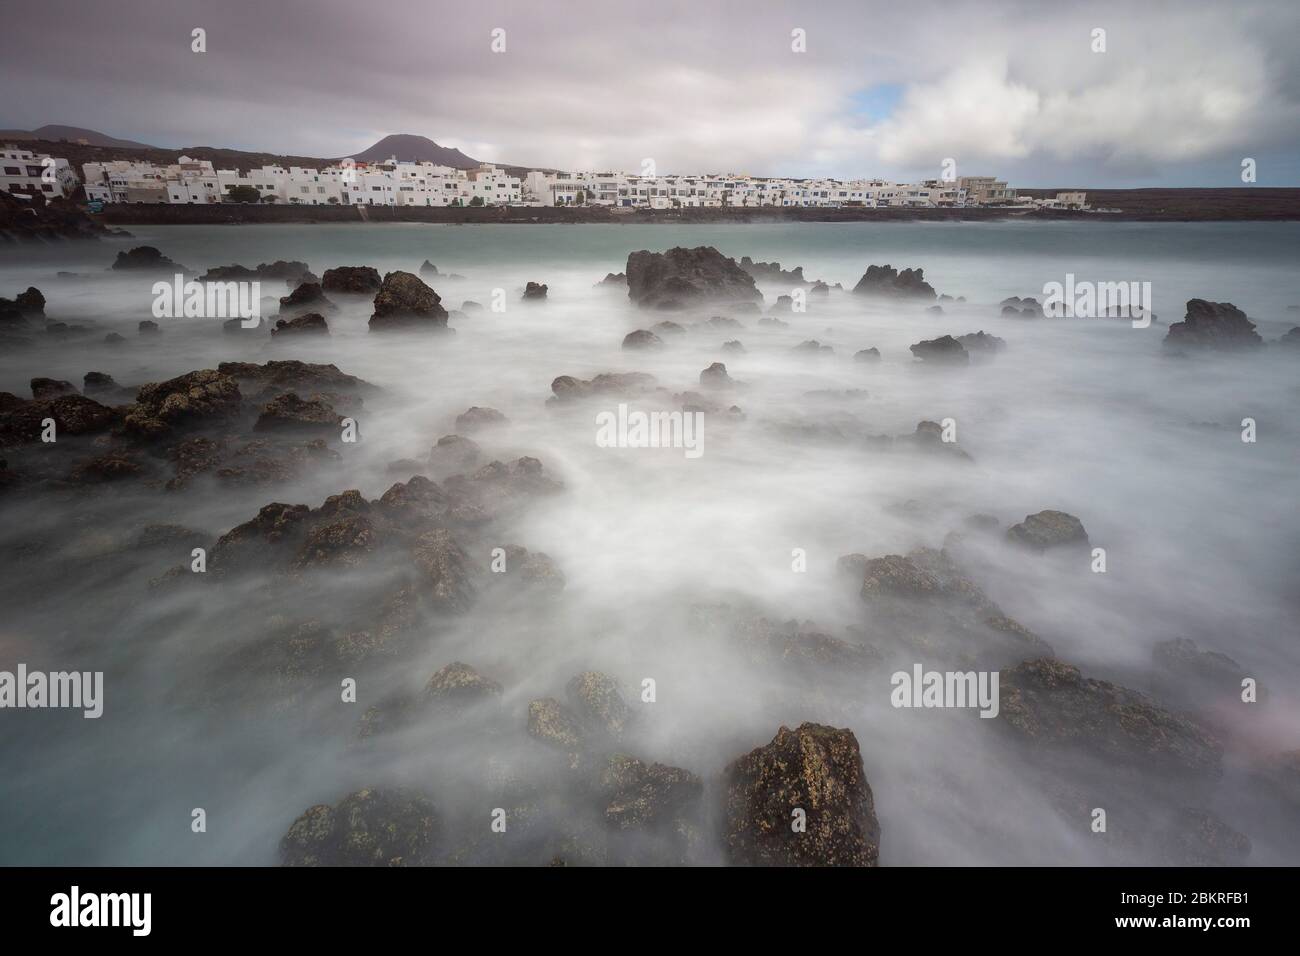 Spain, Islands of the Canary Islands, Island of Lanzarote, the village and the coast of Punta Mujeres Stock Photo